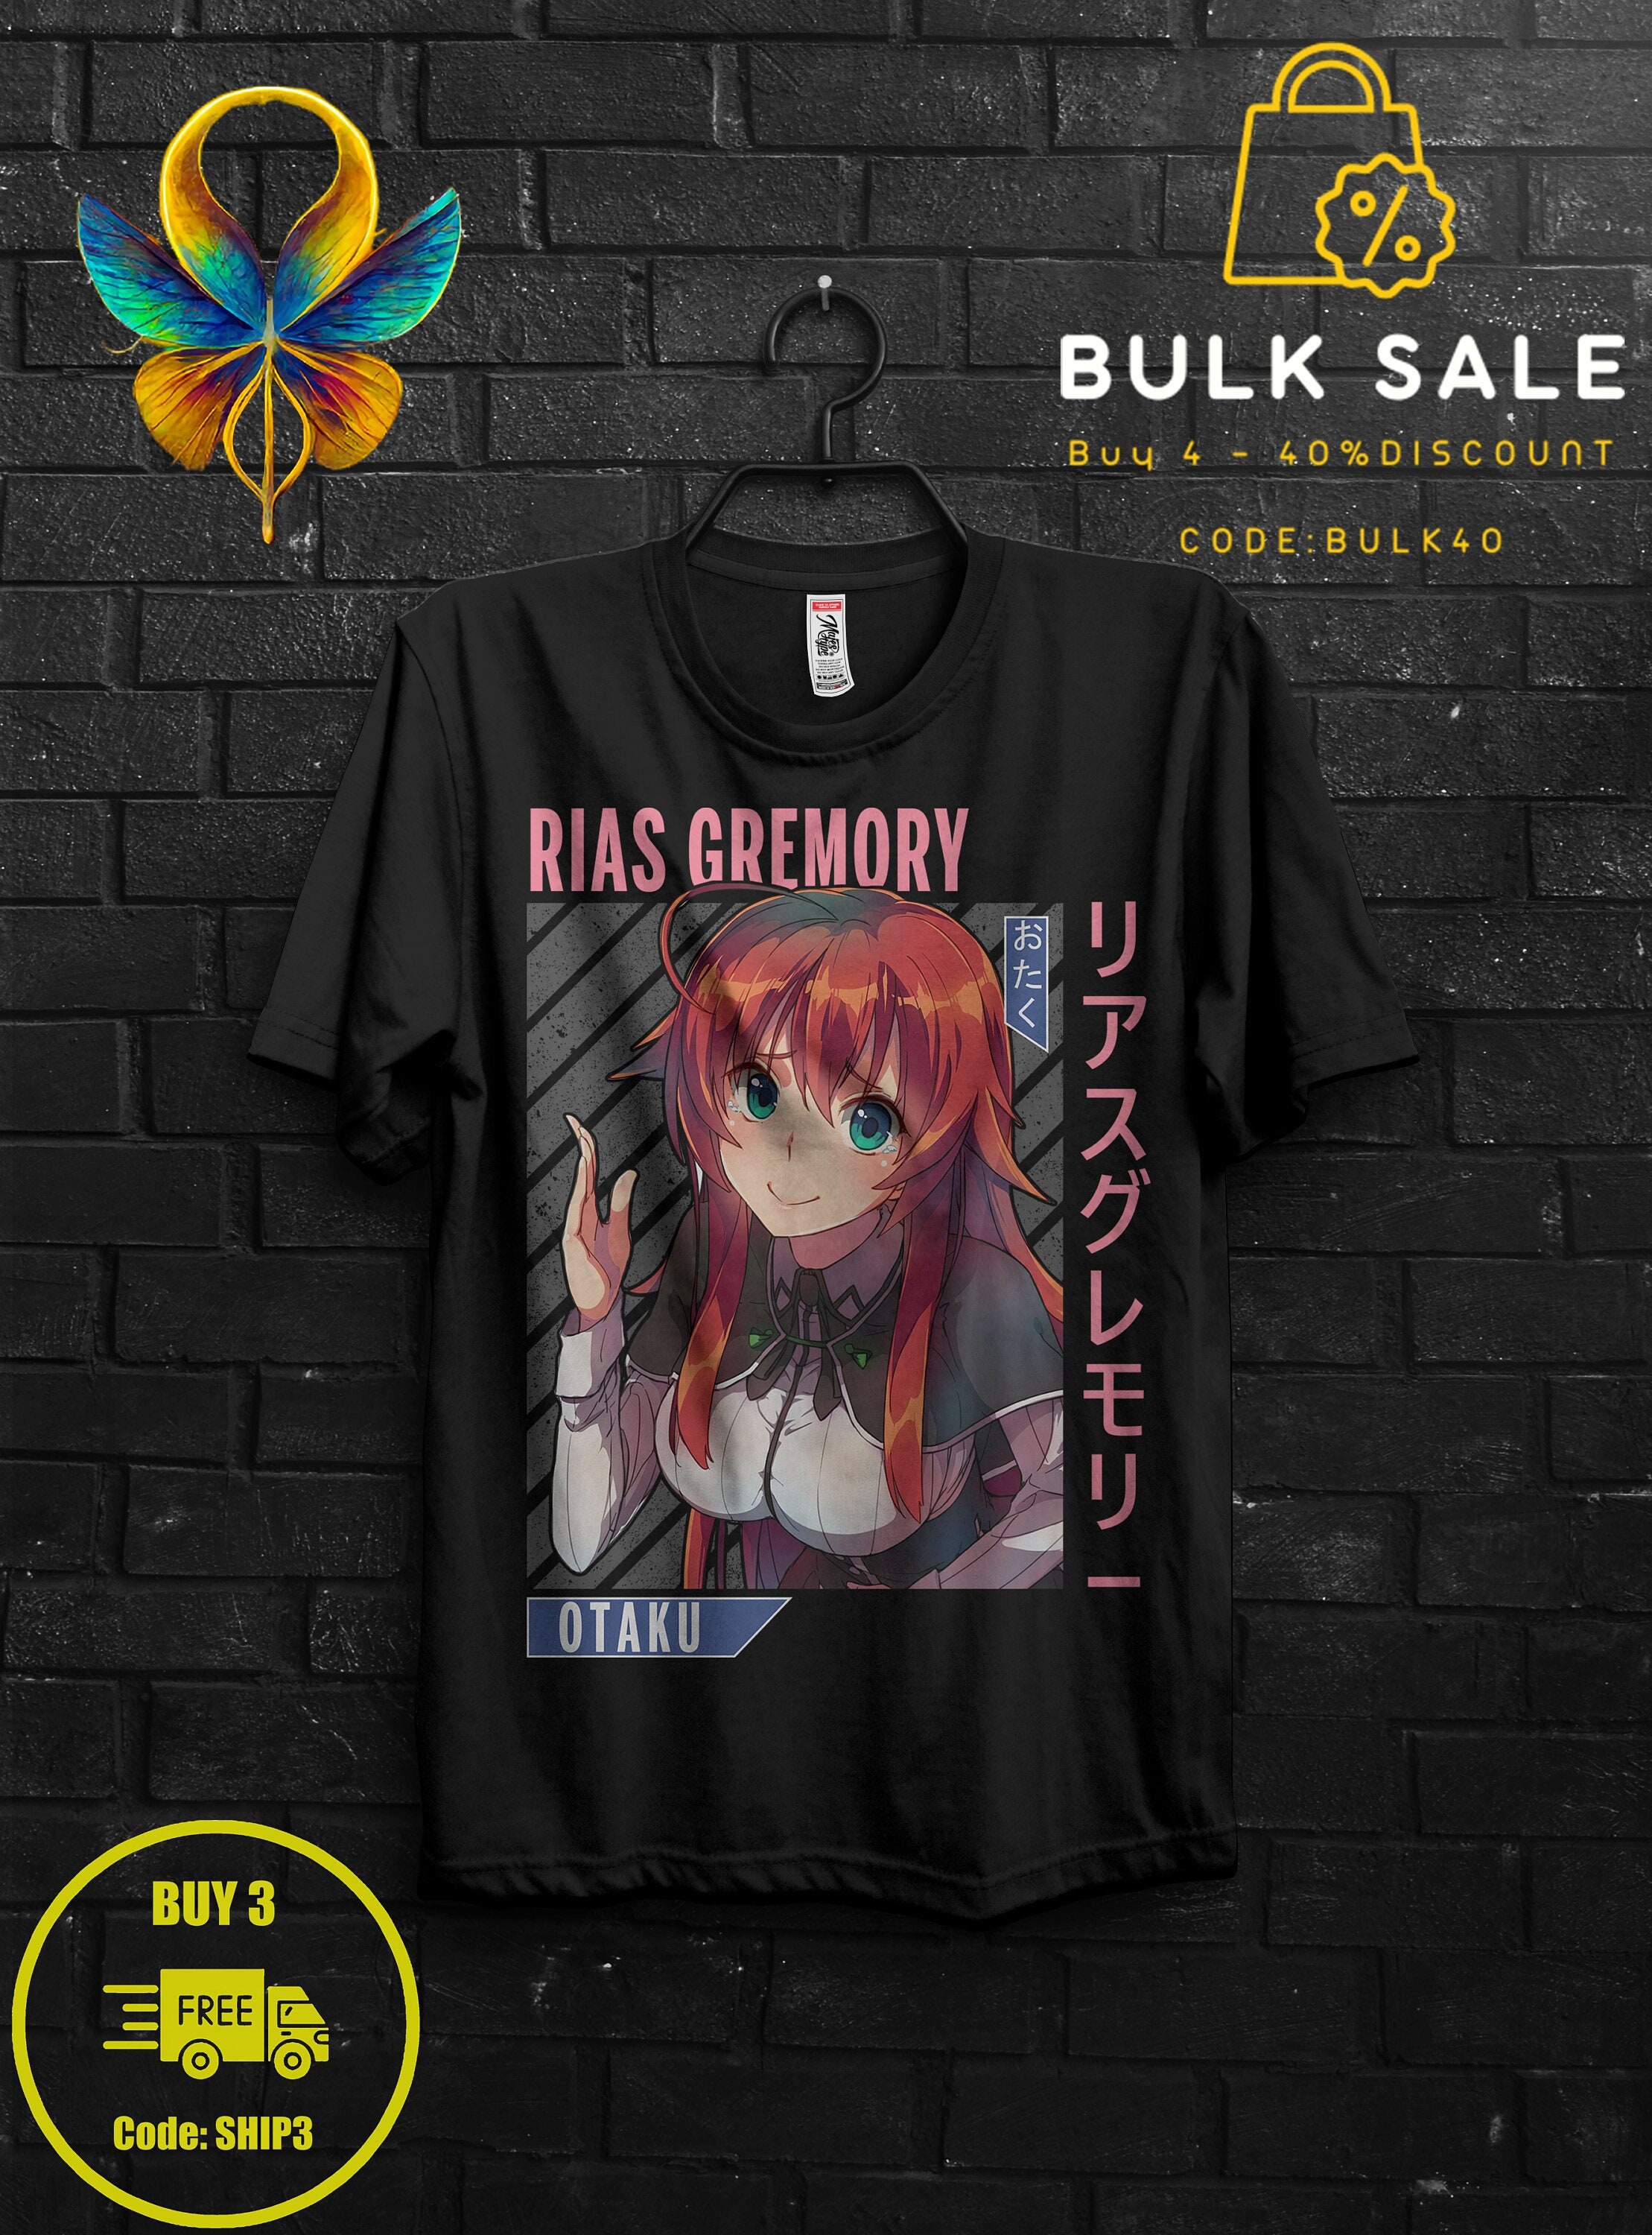 Rias Gremory Shirt Anime Gift Cosplay For Girl,Xenovia Appareal For Her,Rossweisse Tshirt For Sitri,Issei Hyoudou Sweat,High School DxD Tee 1600241781